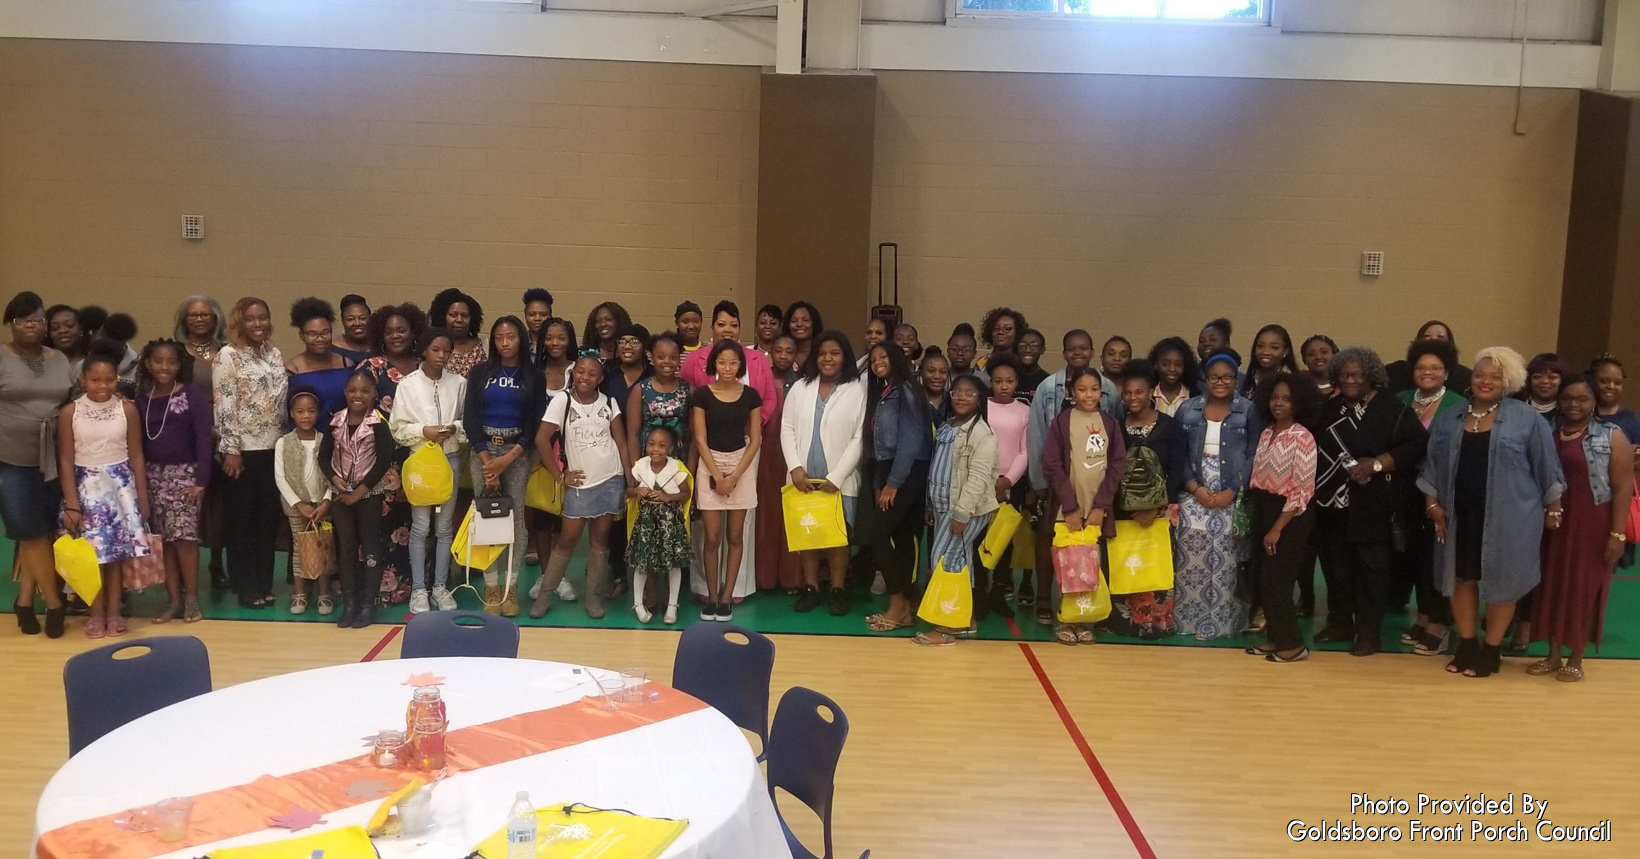 The girls of Eastside and Westside hosted a “Falling in Love with Myself Fall Brunch.” The brunch was held to promote mental health and self-confidence. The girls had a motivational speaker from the sheriff’s office who encouraged the ladies to love themselves